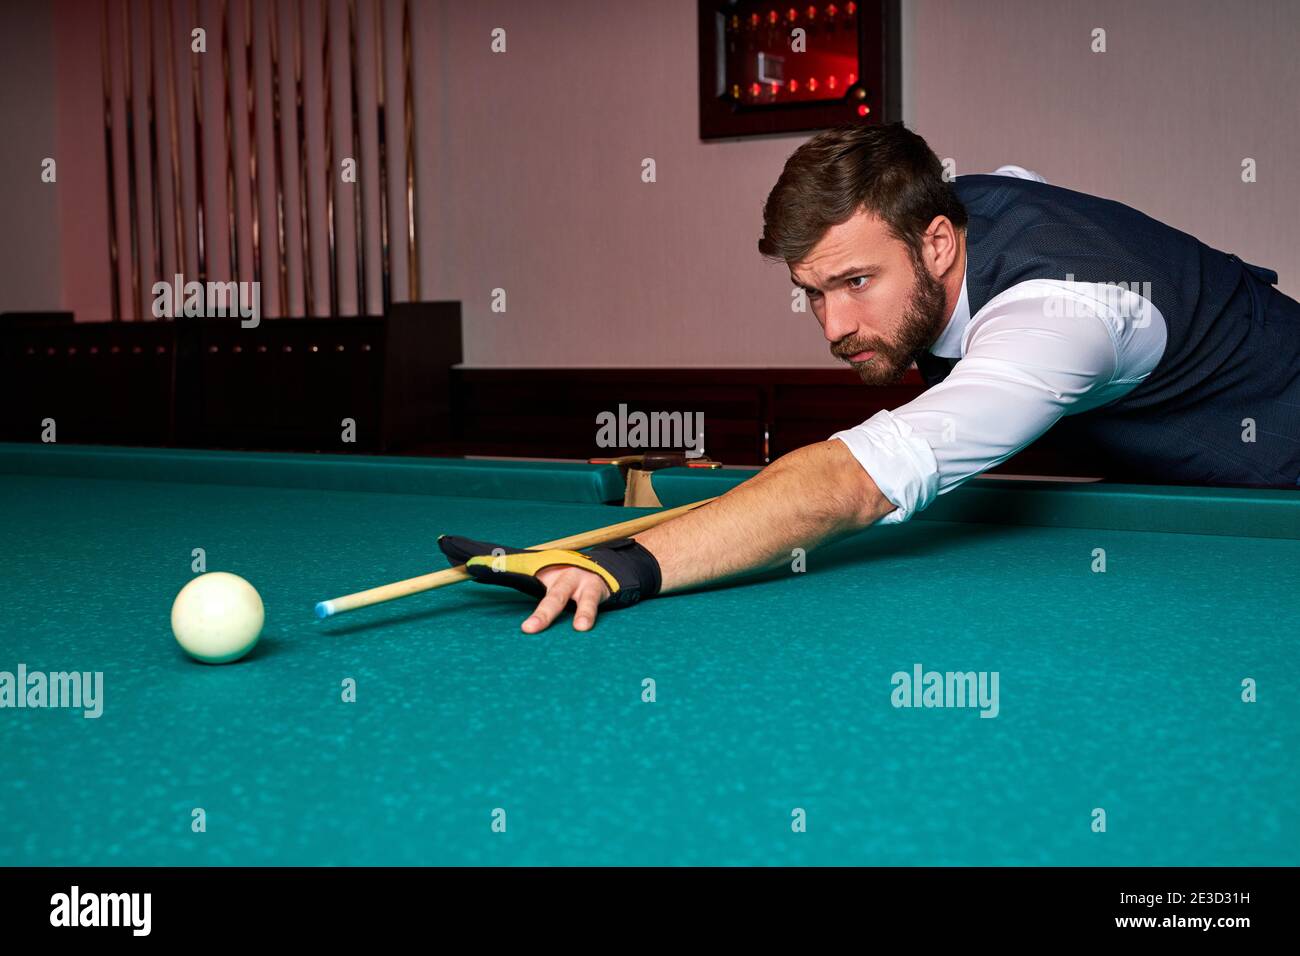 Man Holding Arm On Billiard Table Playing Snooker Game Or Preparing Aiming To Shoot Pool Balls